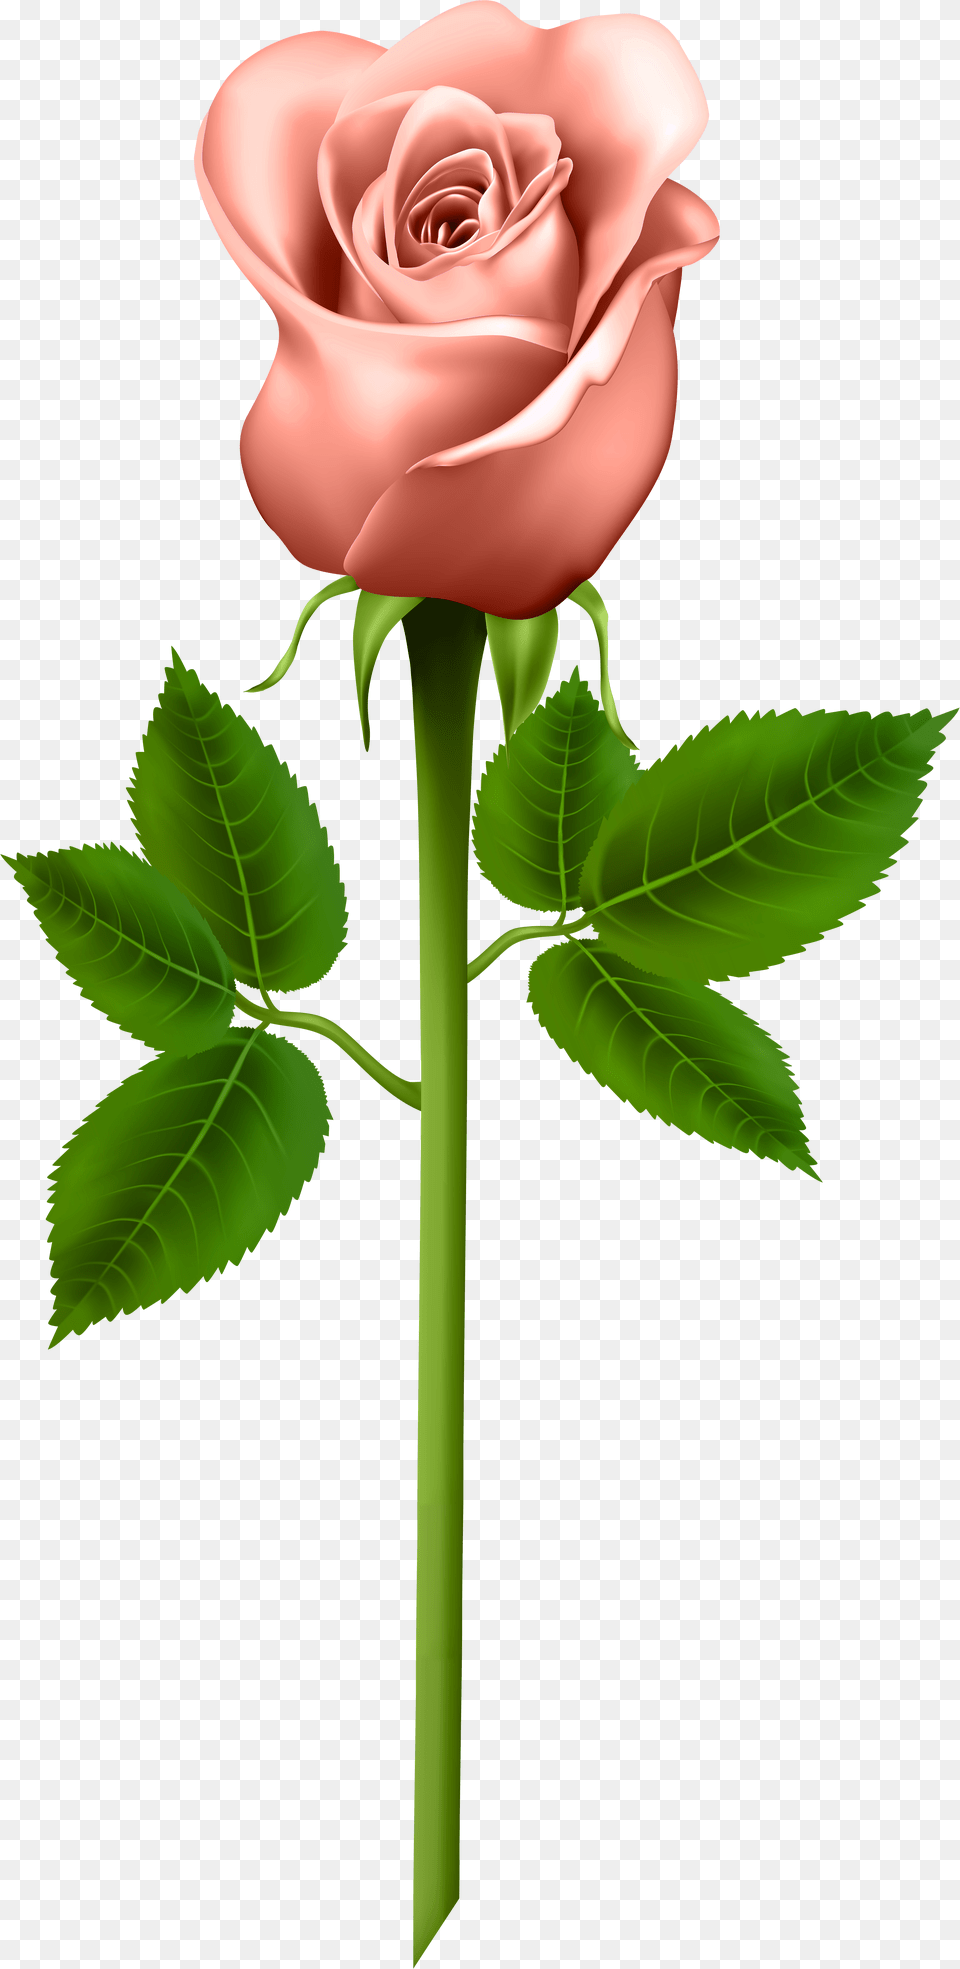 Pink Rose With Black Background Information About Parts Of A Plant, Flower Png Image